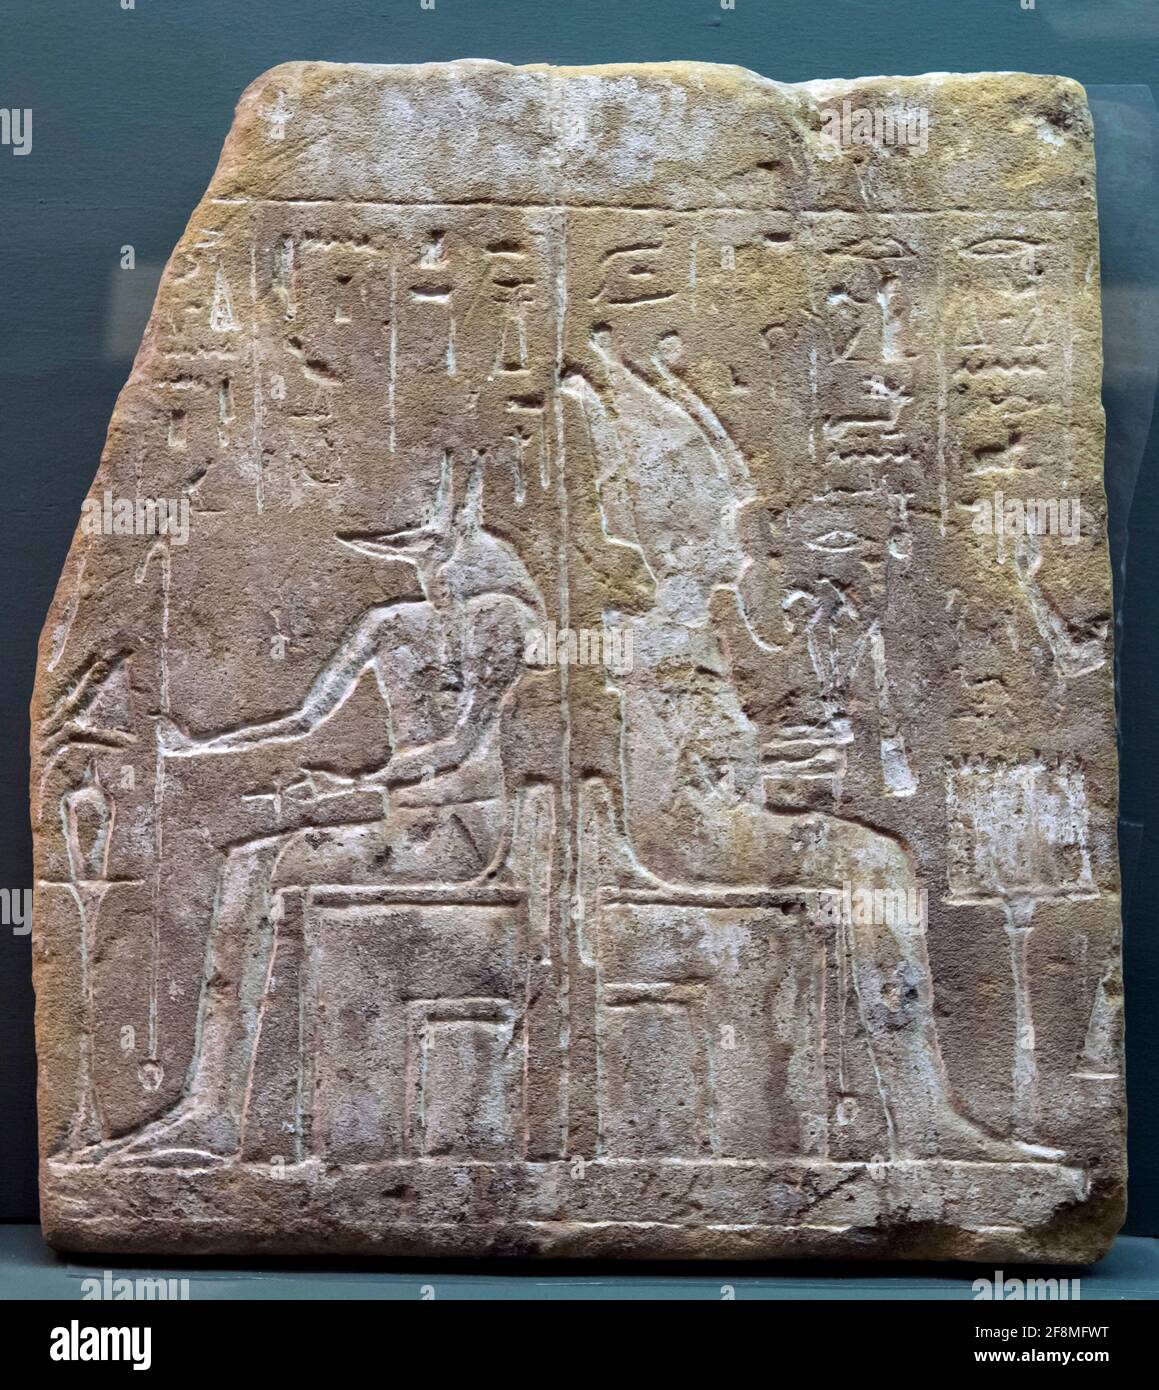 San Jose, California, USA. 14th Apr, 2021. Osirus and Anubis Relief Fragment is seen on display at the Rosicrucian Egyptian Museum. Established in 1928 as The Rosicrucian Egyptian Oriental Museum, the Museum - owned by the Rosicrucian Order, a philosophical and educational 501c3 public benefit organization - now houses more than 4,000 artifacts. It is the largest display of Egyptian artifacts in western North America. Credit: Brian Cahn/ZUMA Wire/Alamy Live News Stock Photo